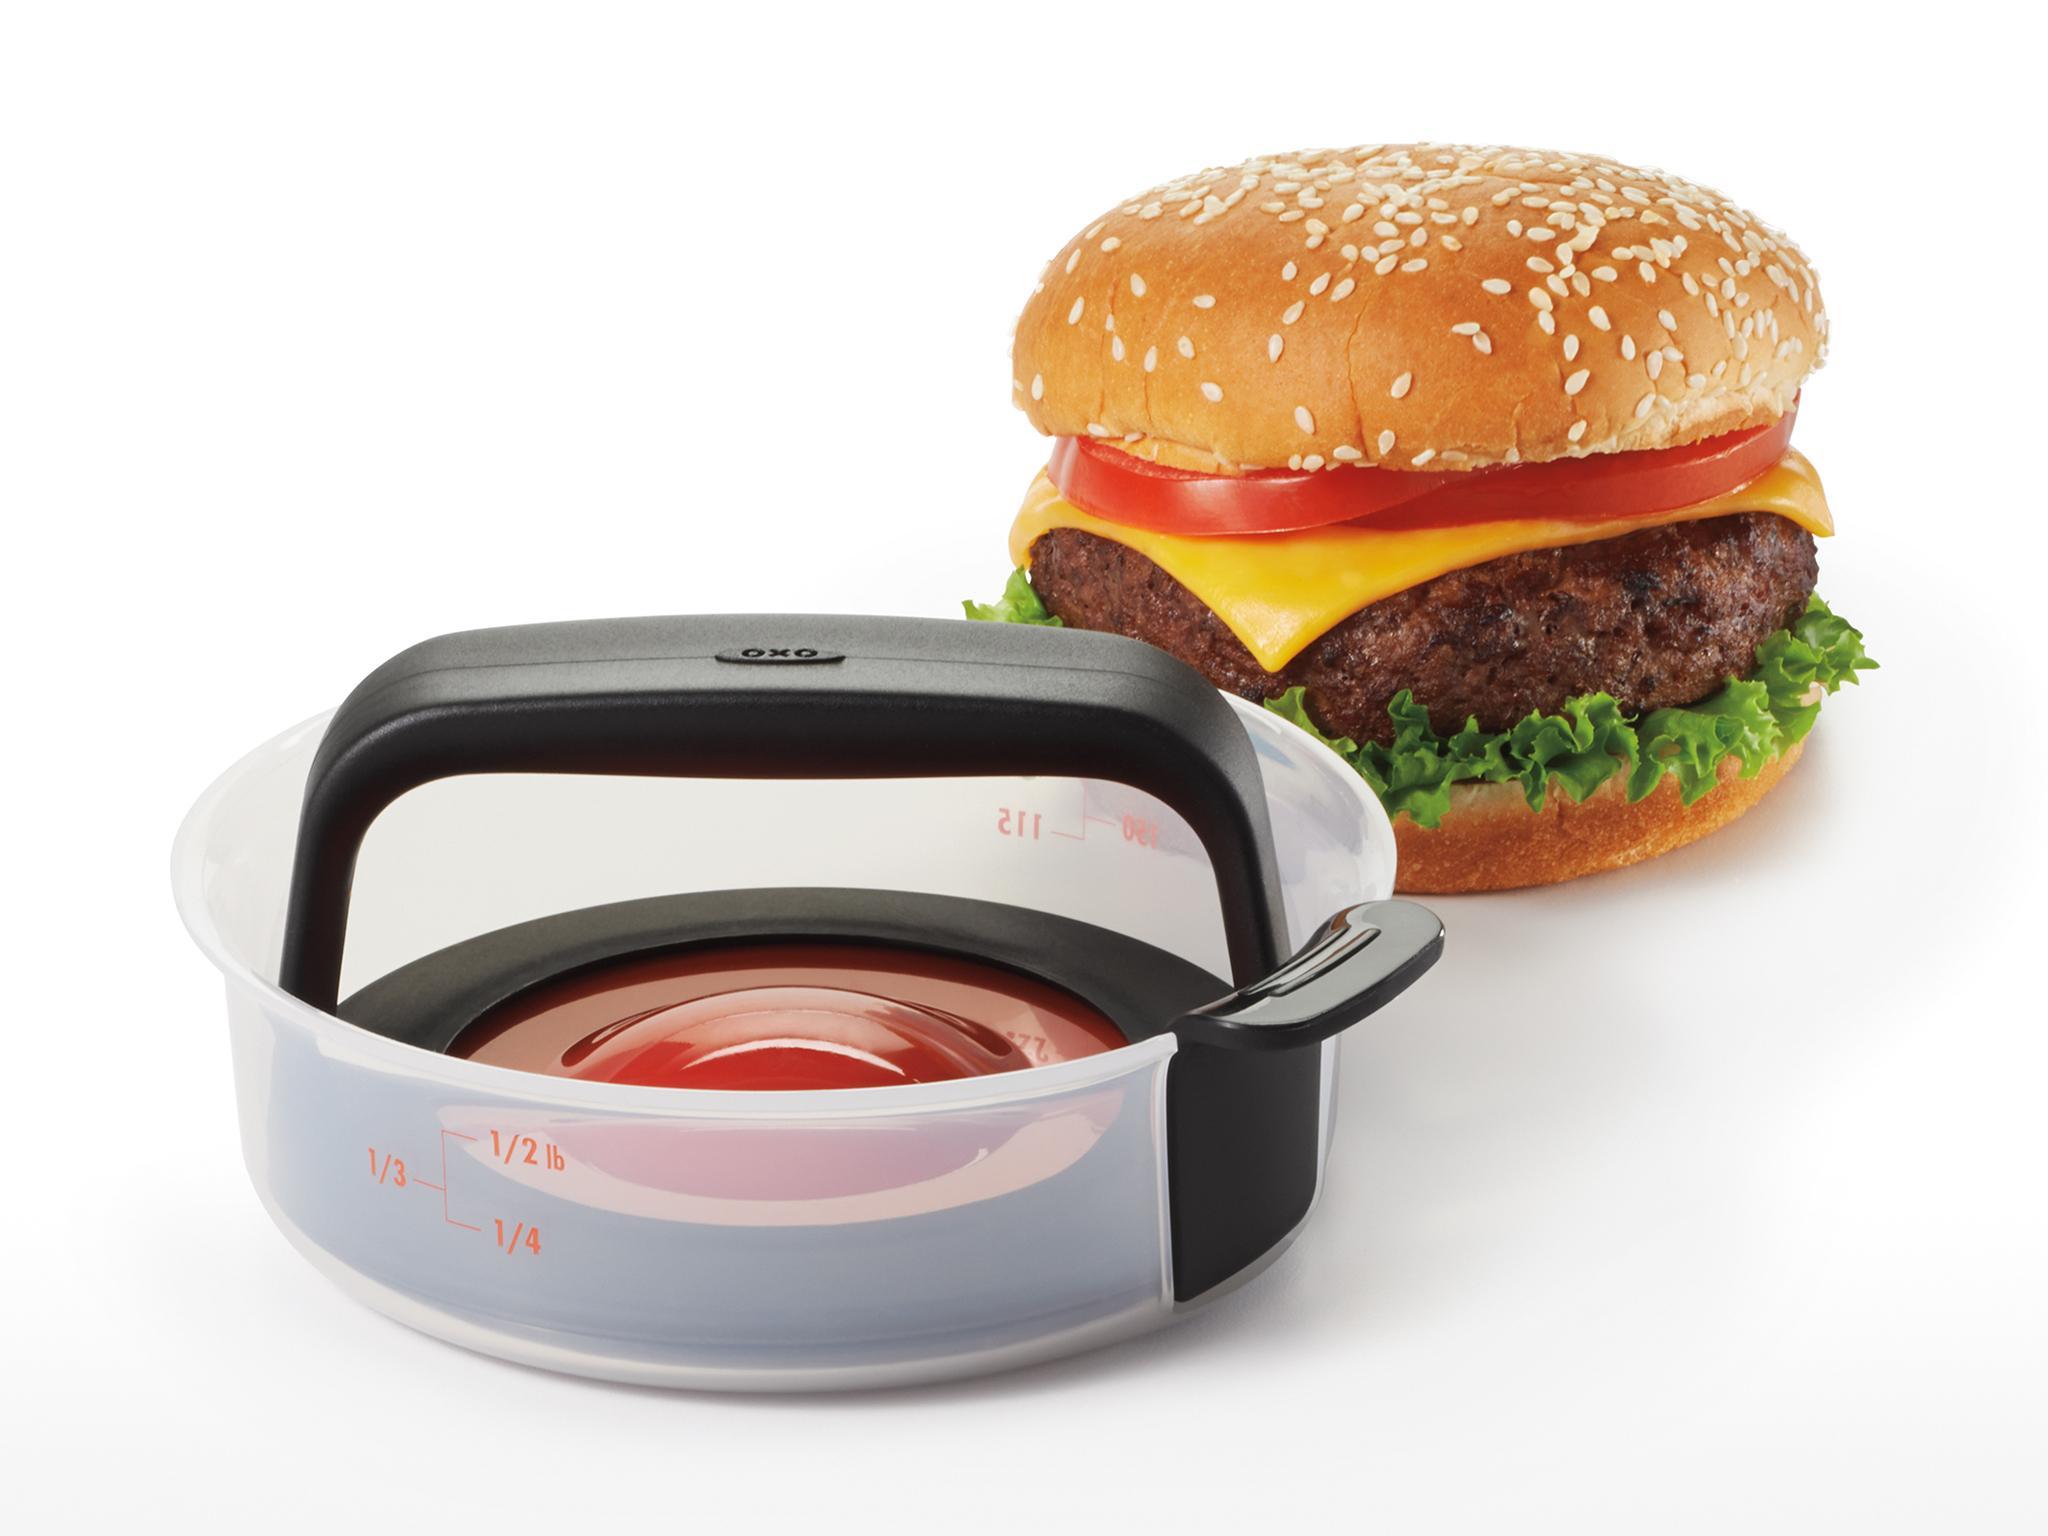 Im-press-ive: This OXO burger press goes for £12.99